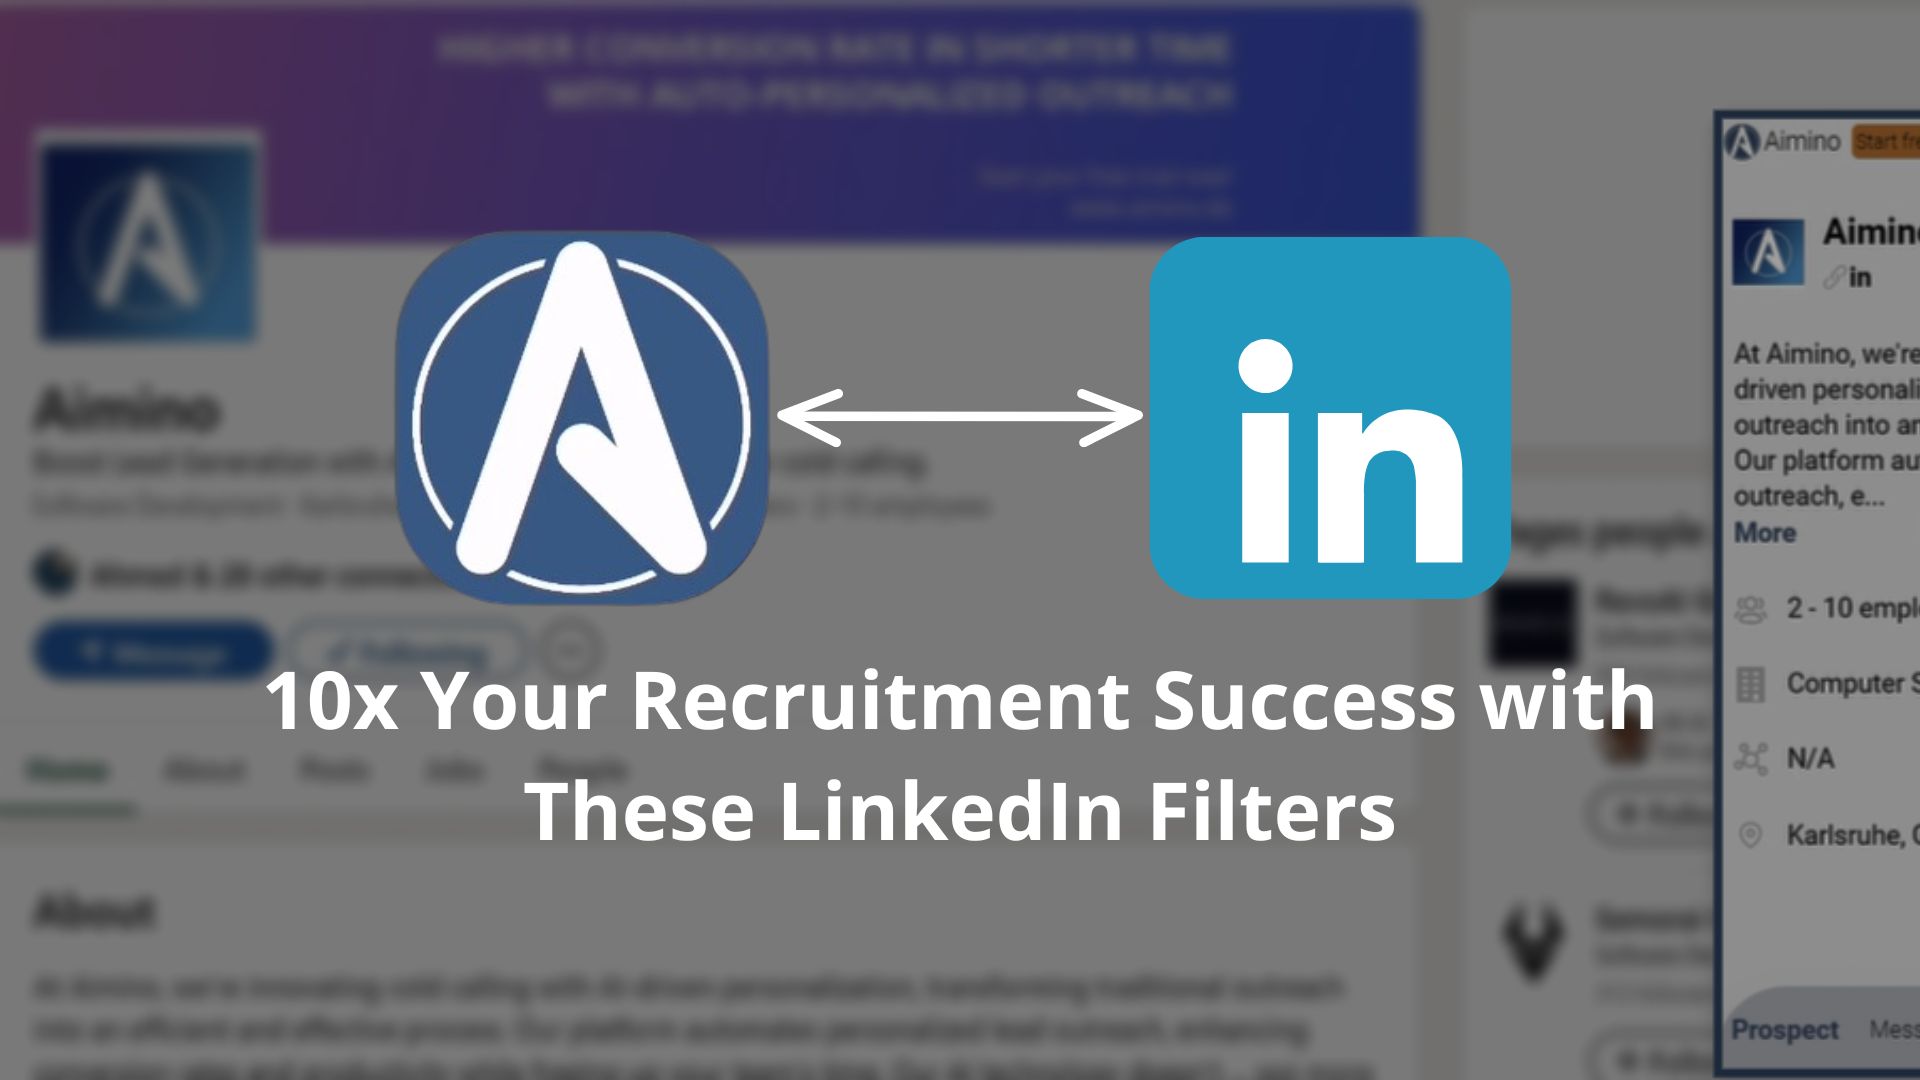 10x Your Recruitment Success with These LinkedIn Filters